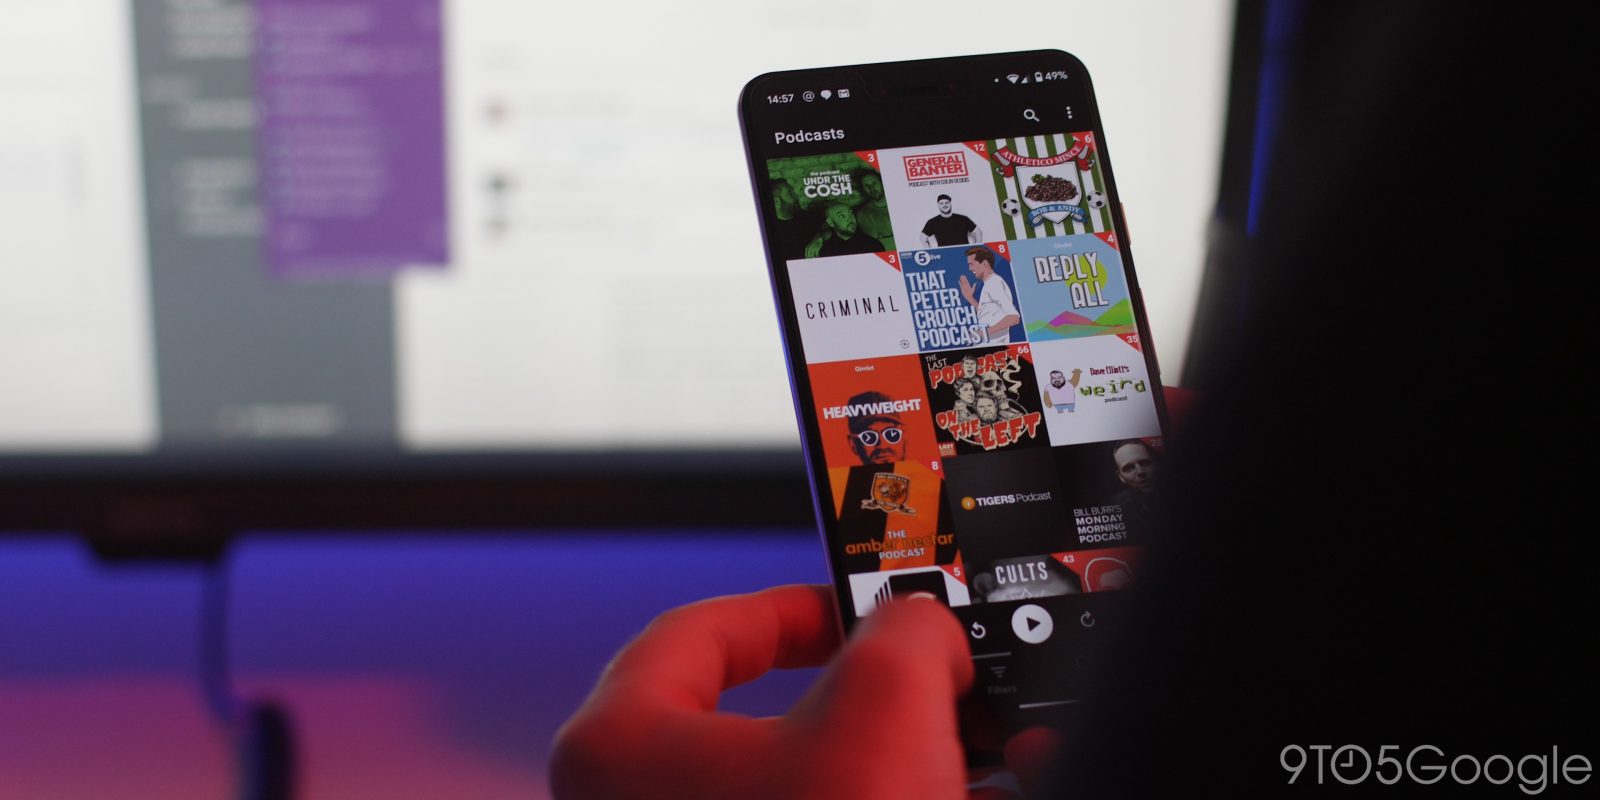 Pocket casts for Android